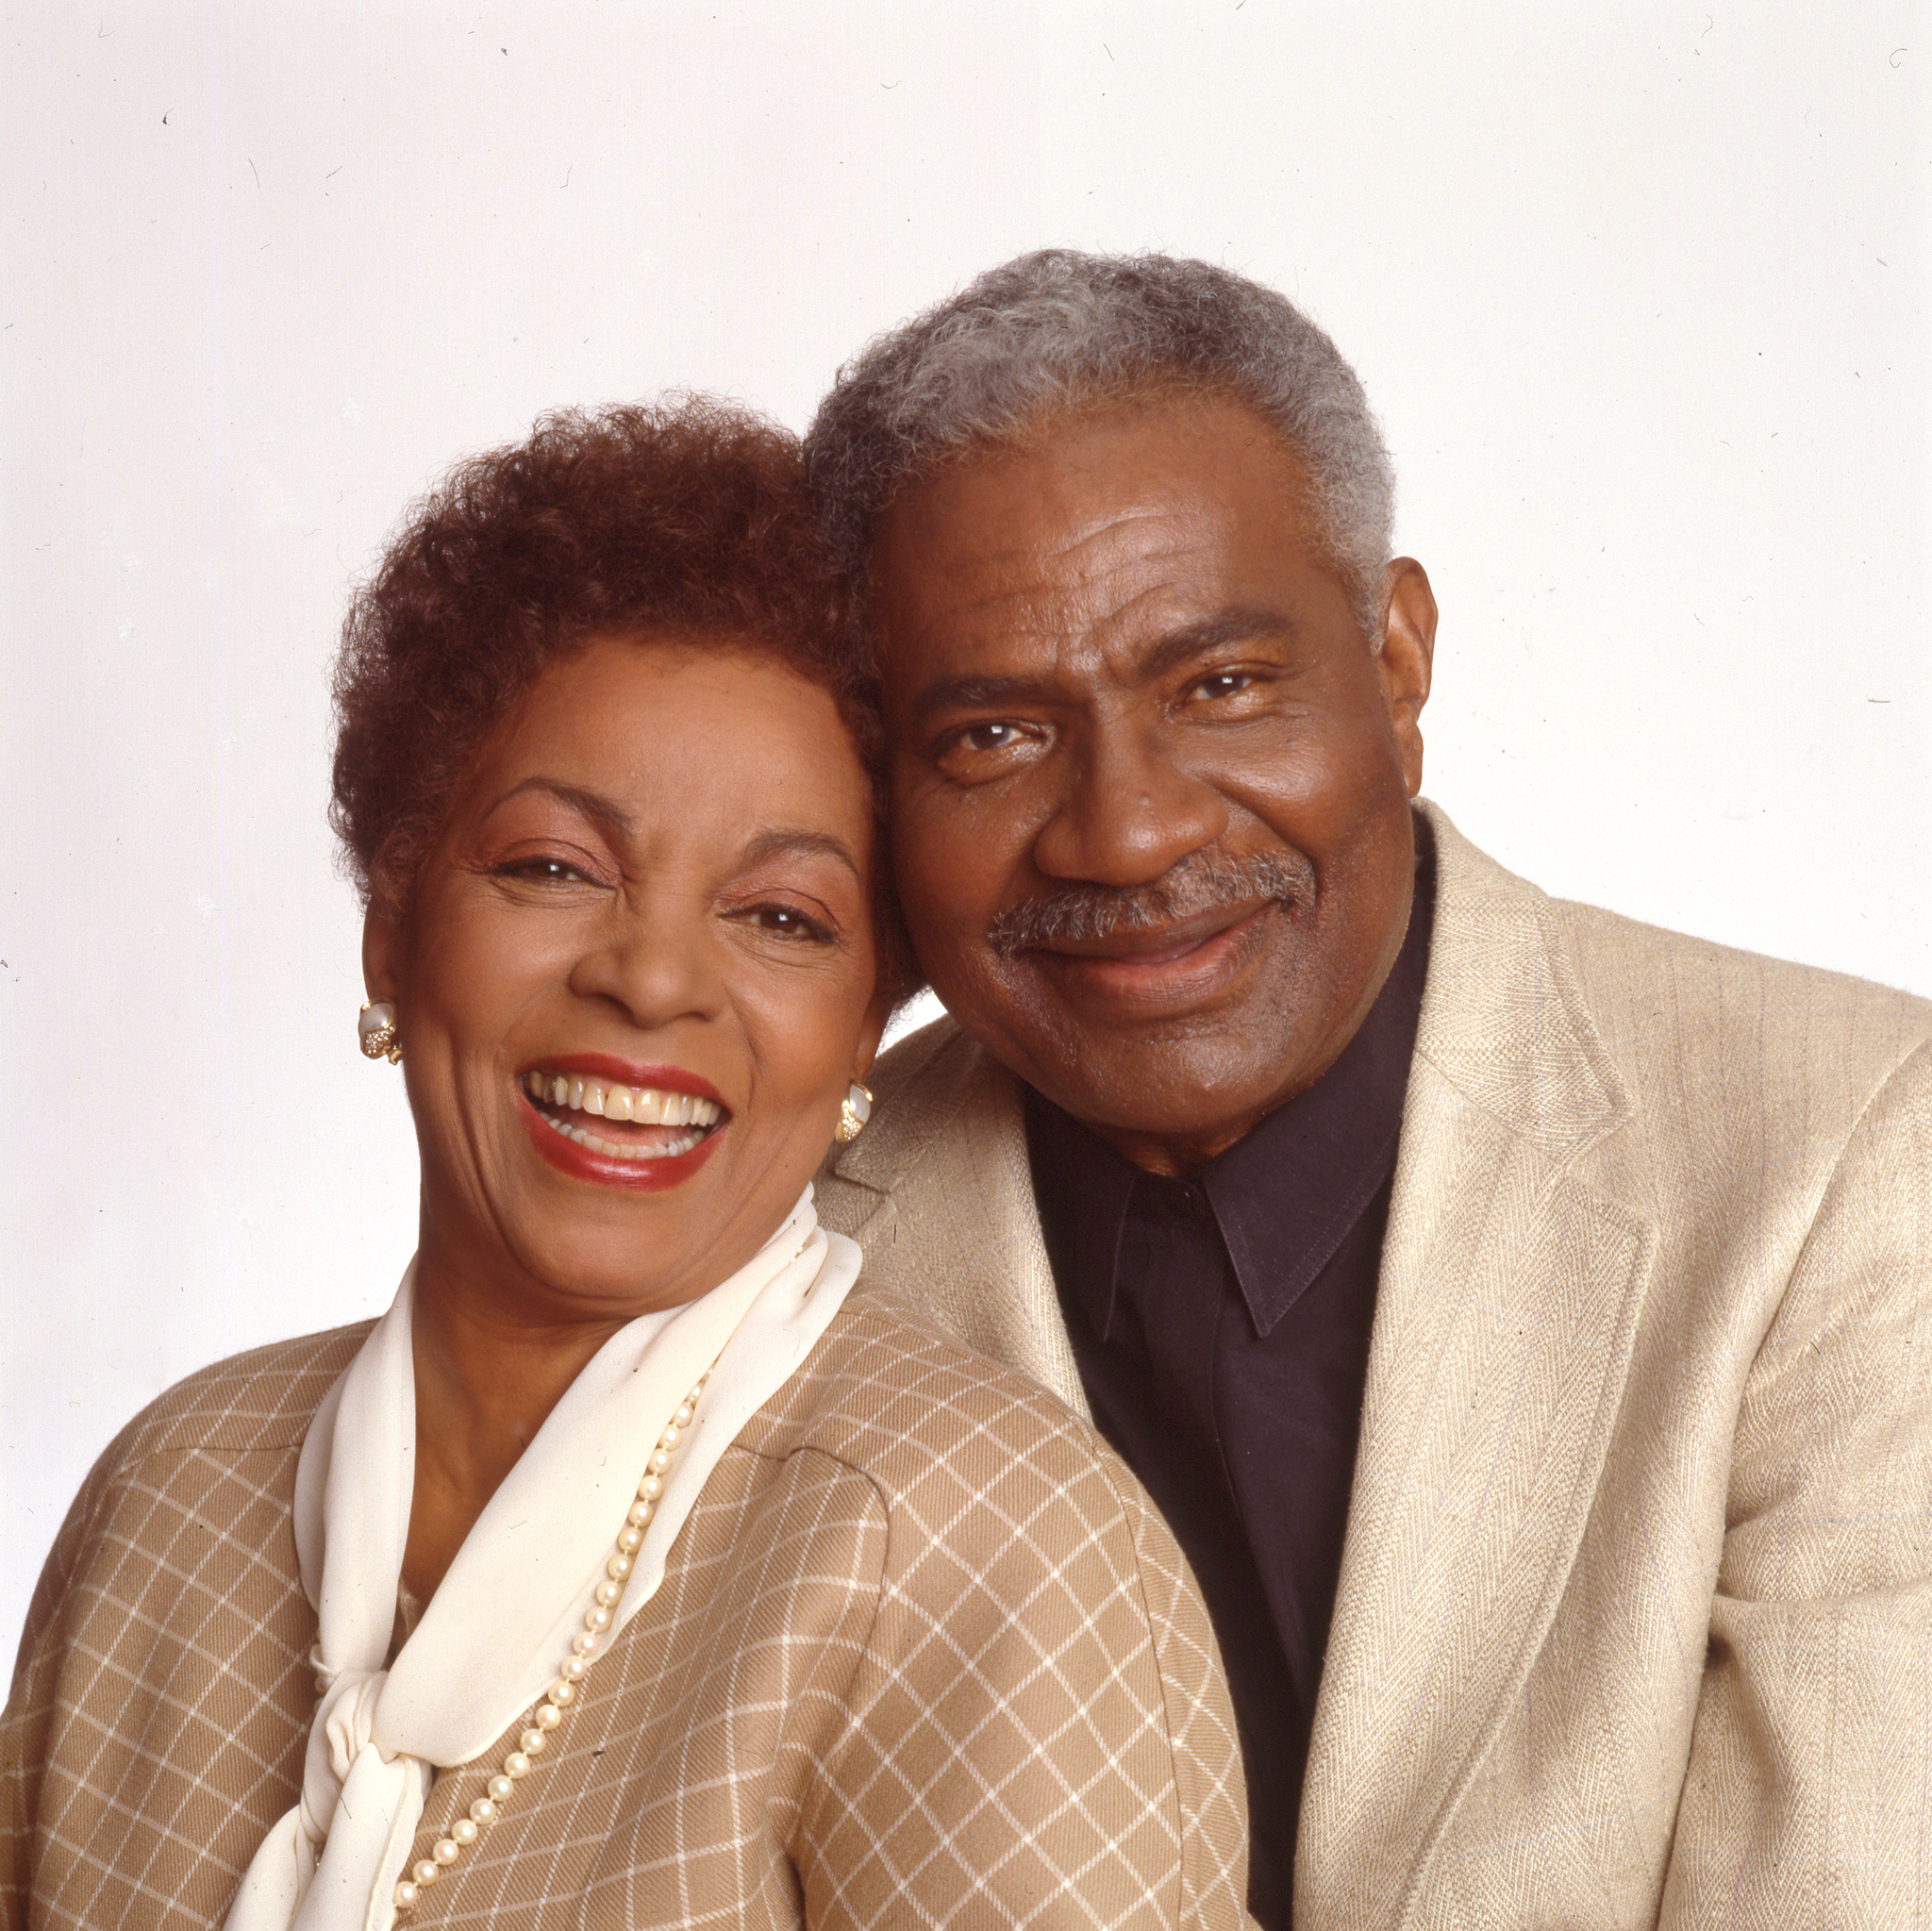 Portrait of married American actors and Civil Rights activists Ruby Dee and Ossie Davis (1917 - 2005) as they pose against a white background, New York, New York, 1980s.